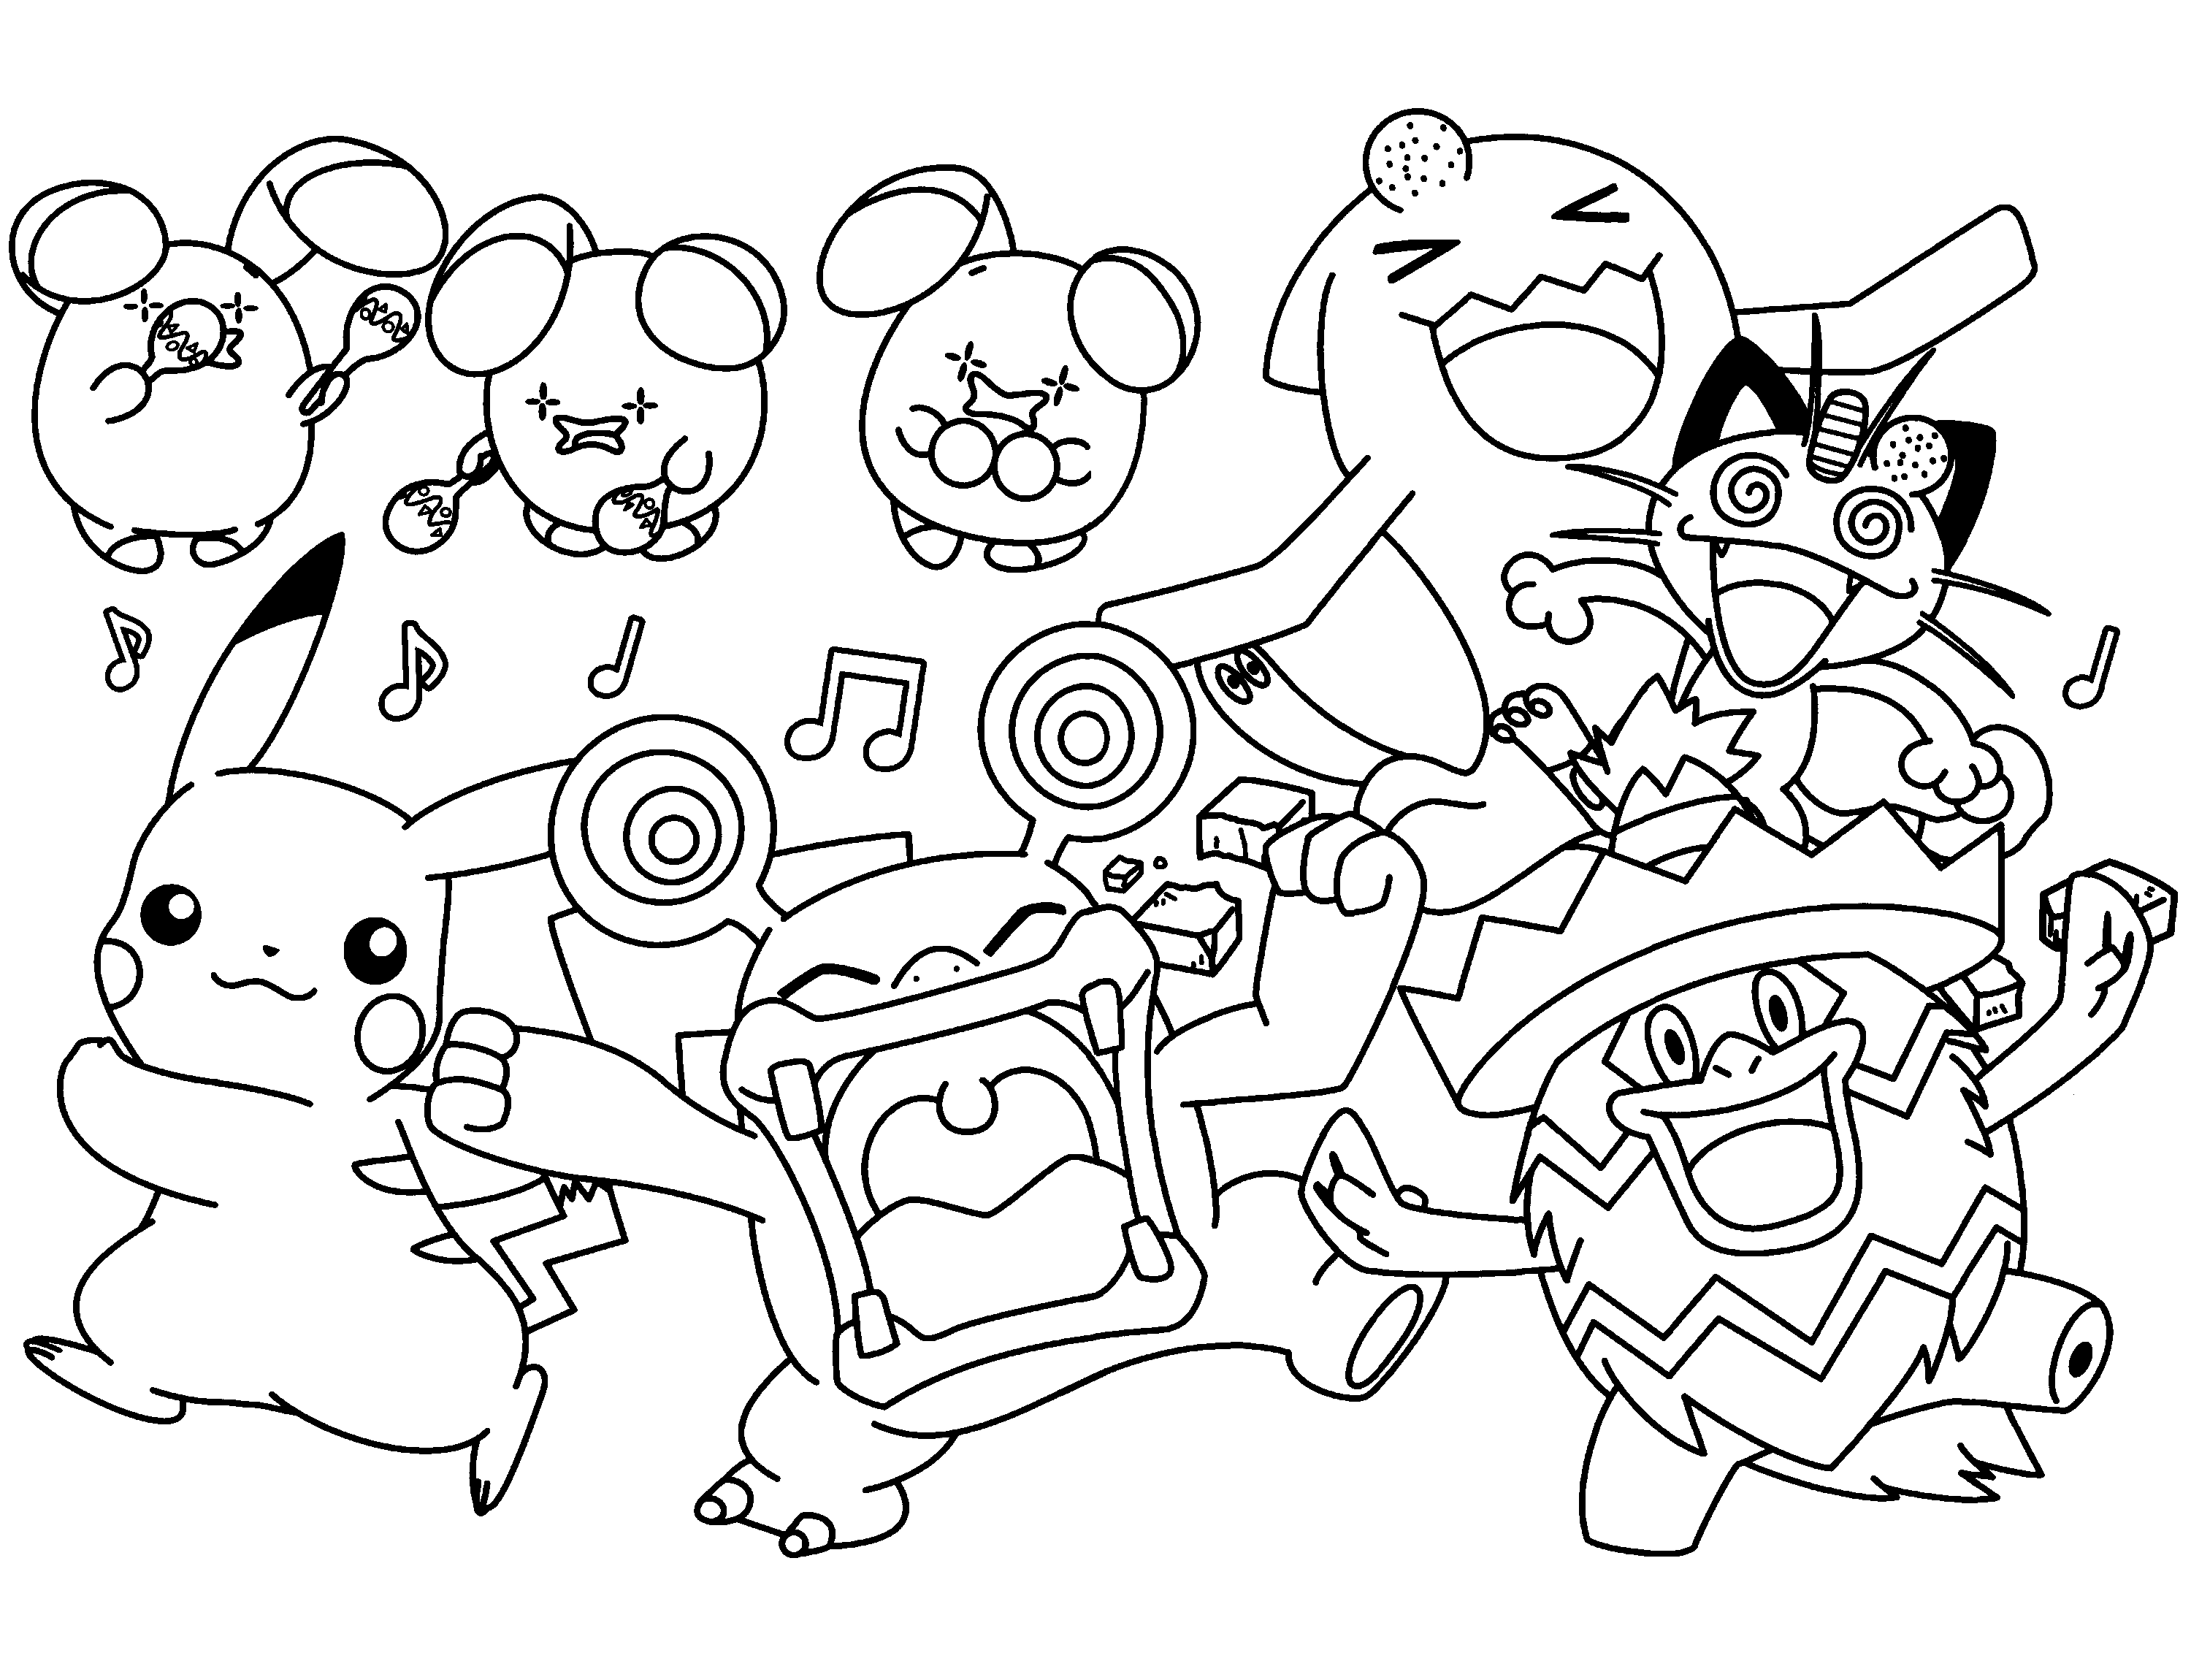 Download Pokemon Coloring Pages. Join your favorite Pokemon on an Adventure!